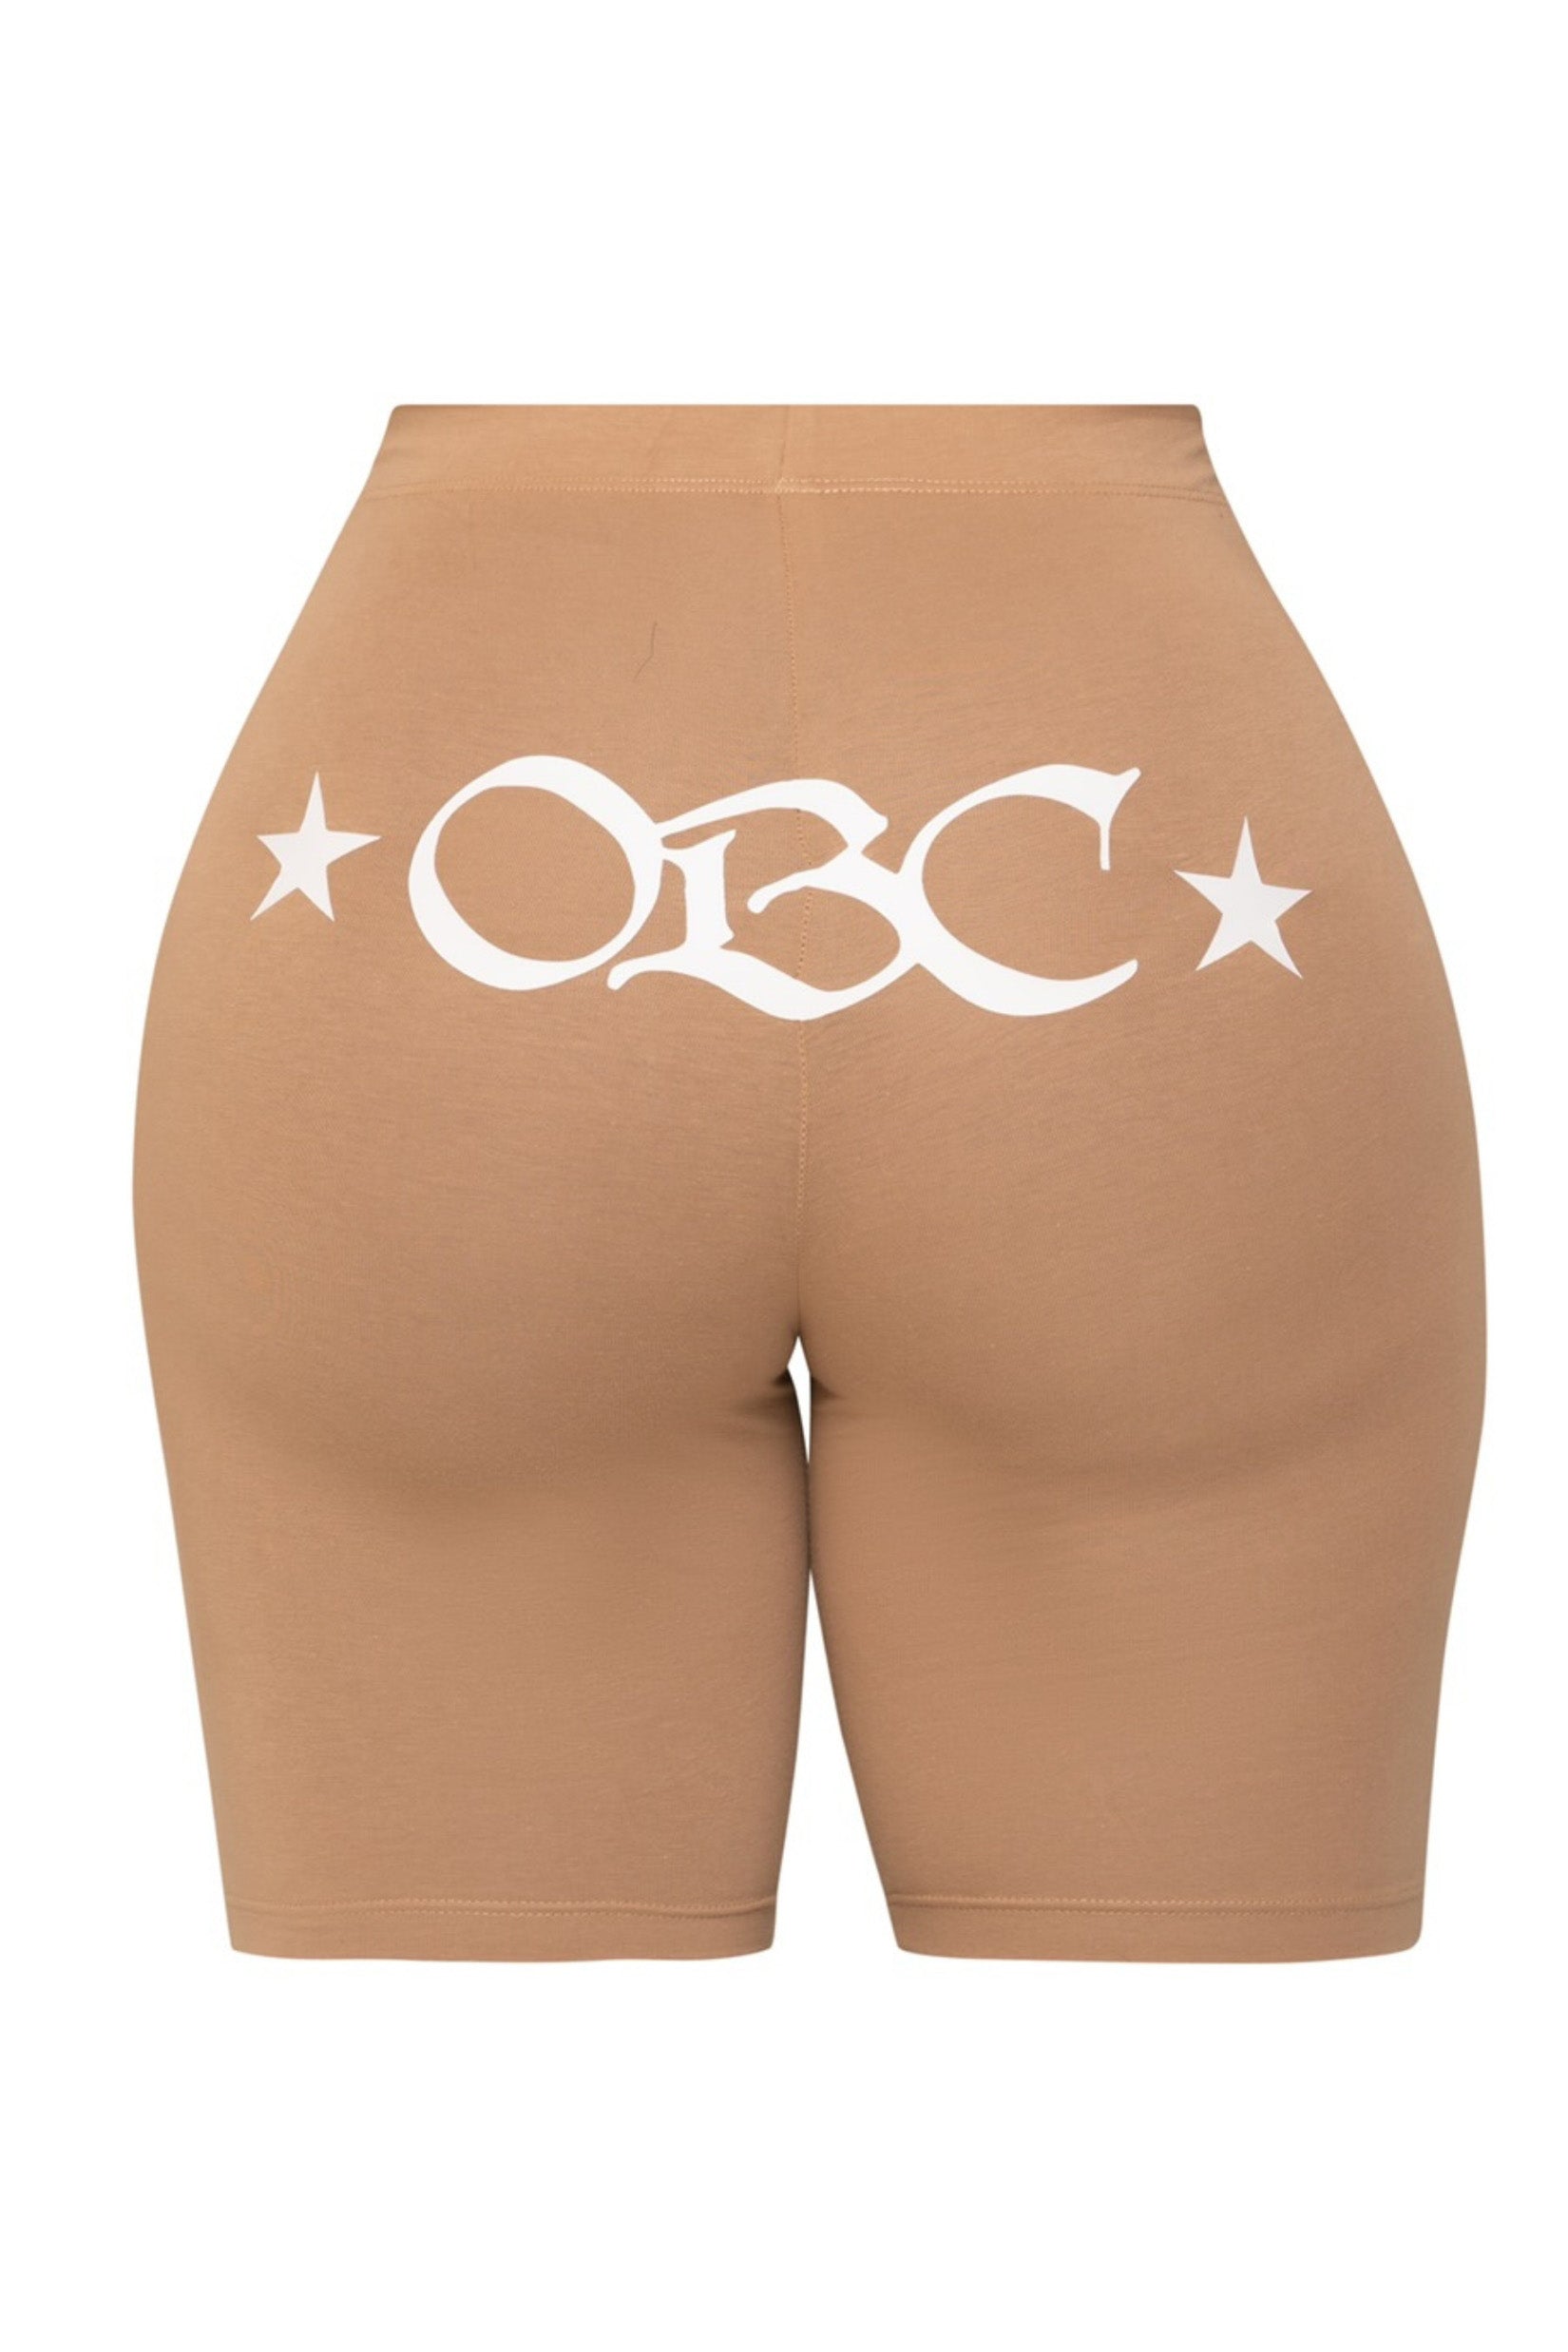 OBC BIKER SHORTS (NUDE)